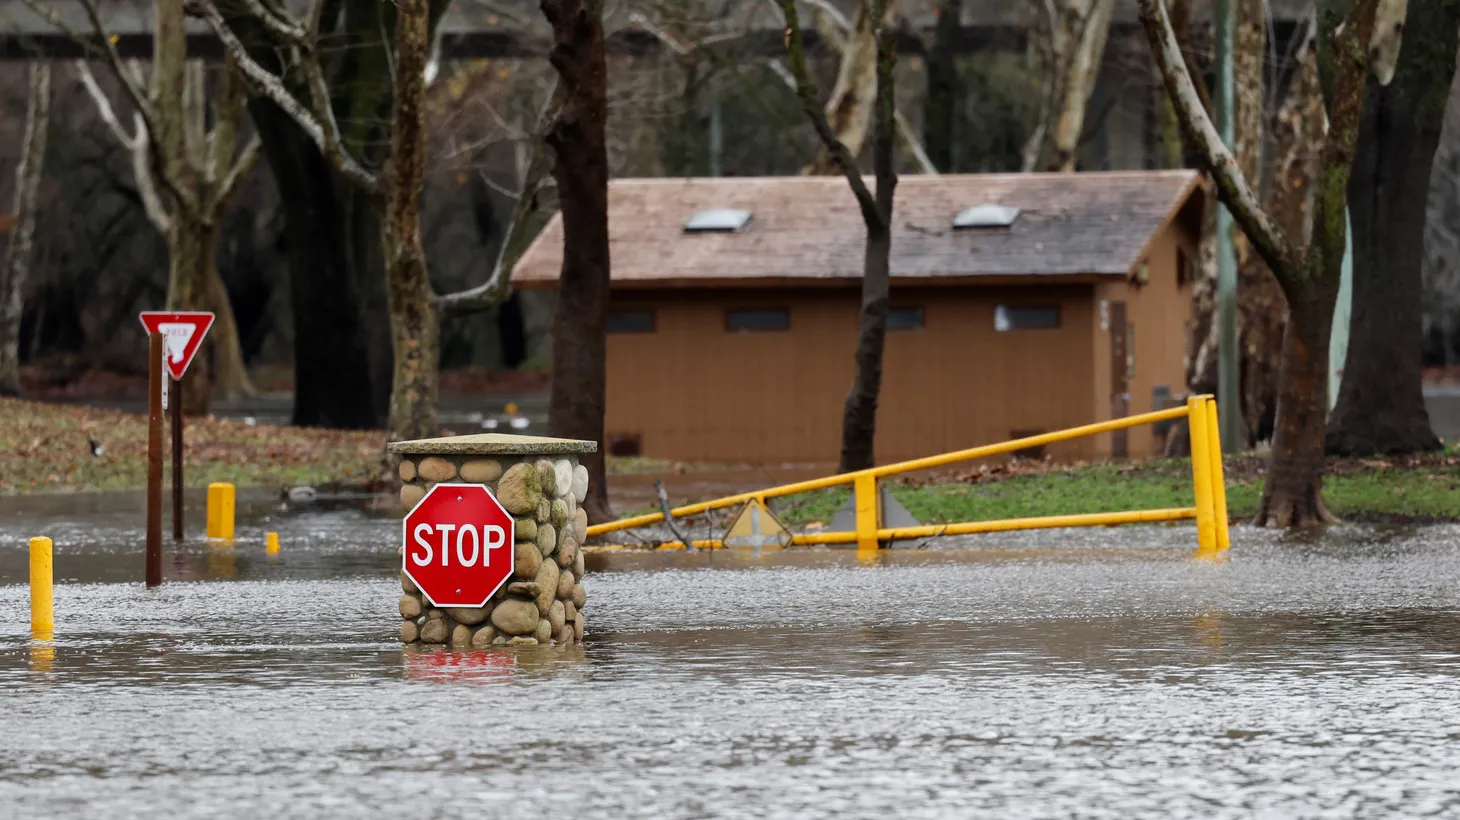 CA is in an active flood emergency plus drought emergency. How'd ... - KCRW